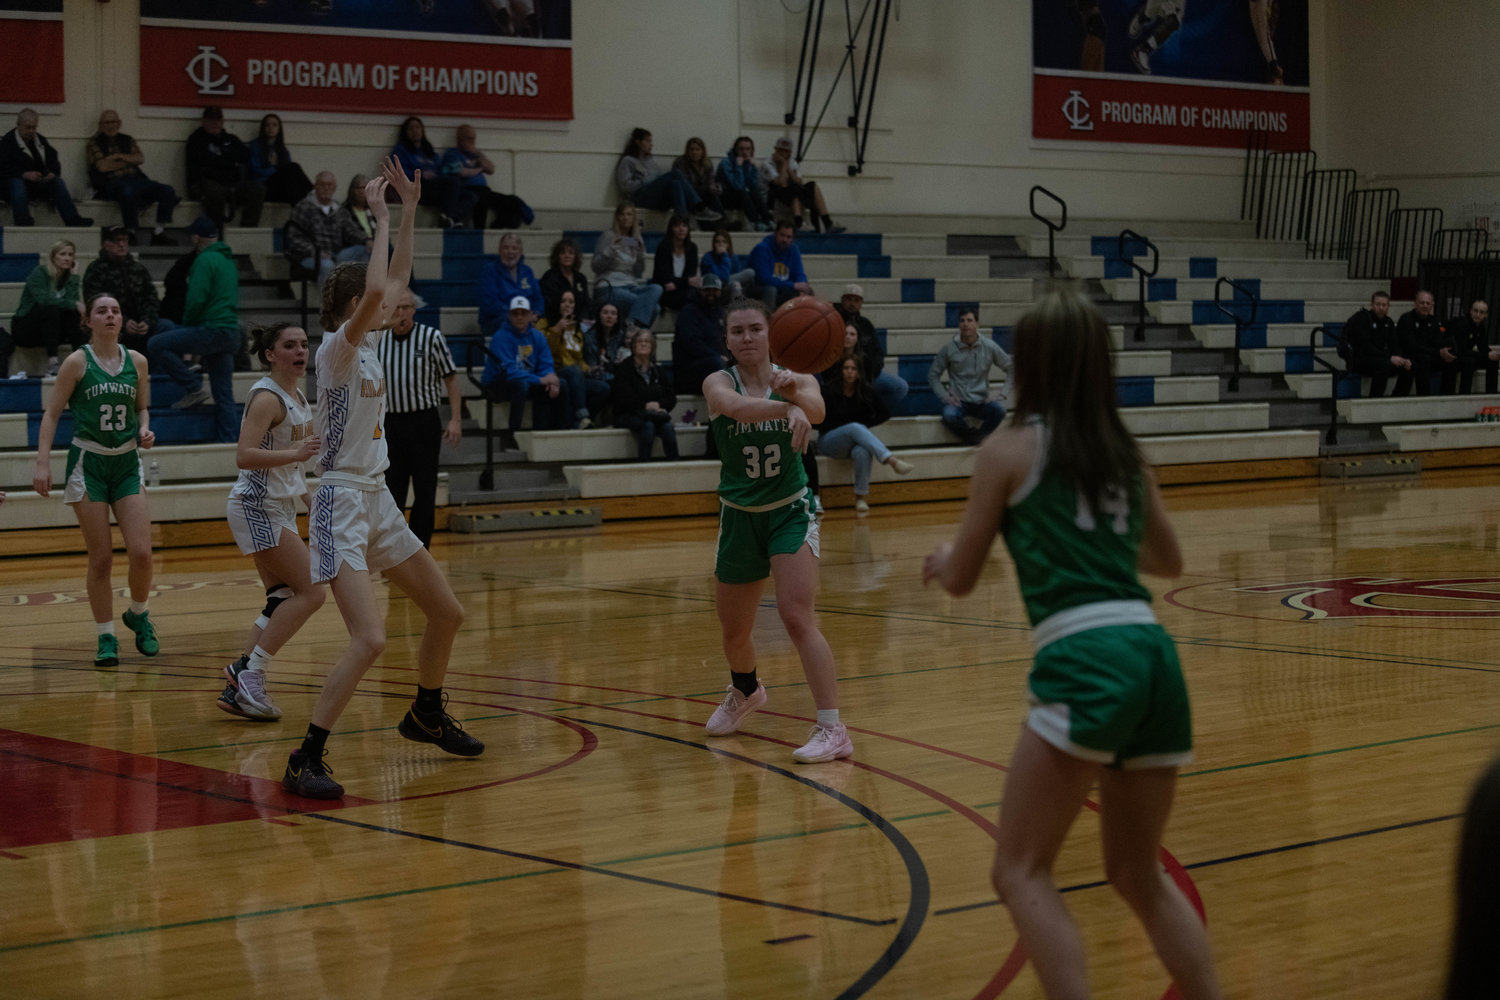 Cierra Larson throws a pass around the arc during the second half of Tumwater's 39-25 win over Kelso on Jan. 16 at the LCC MLK Day Classic in Longview.